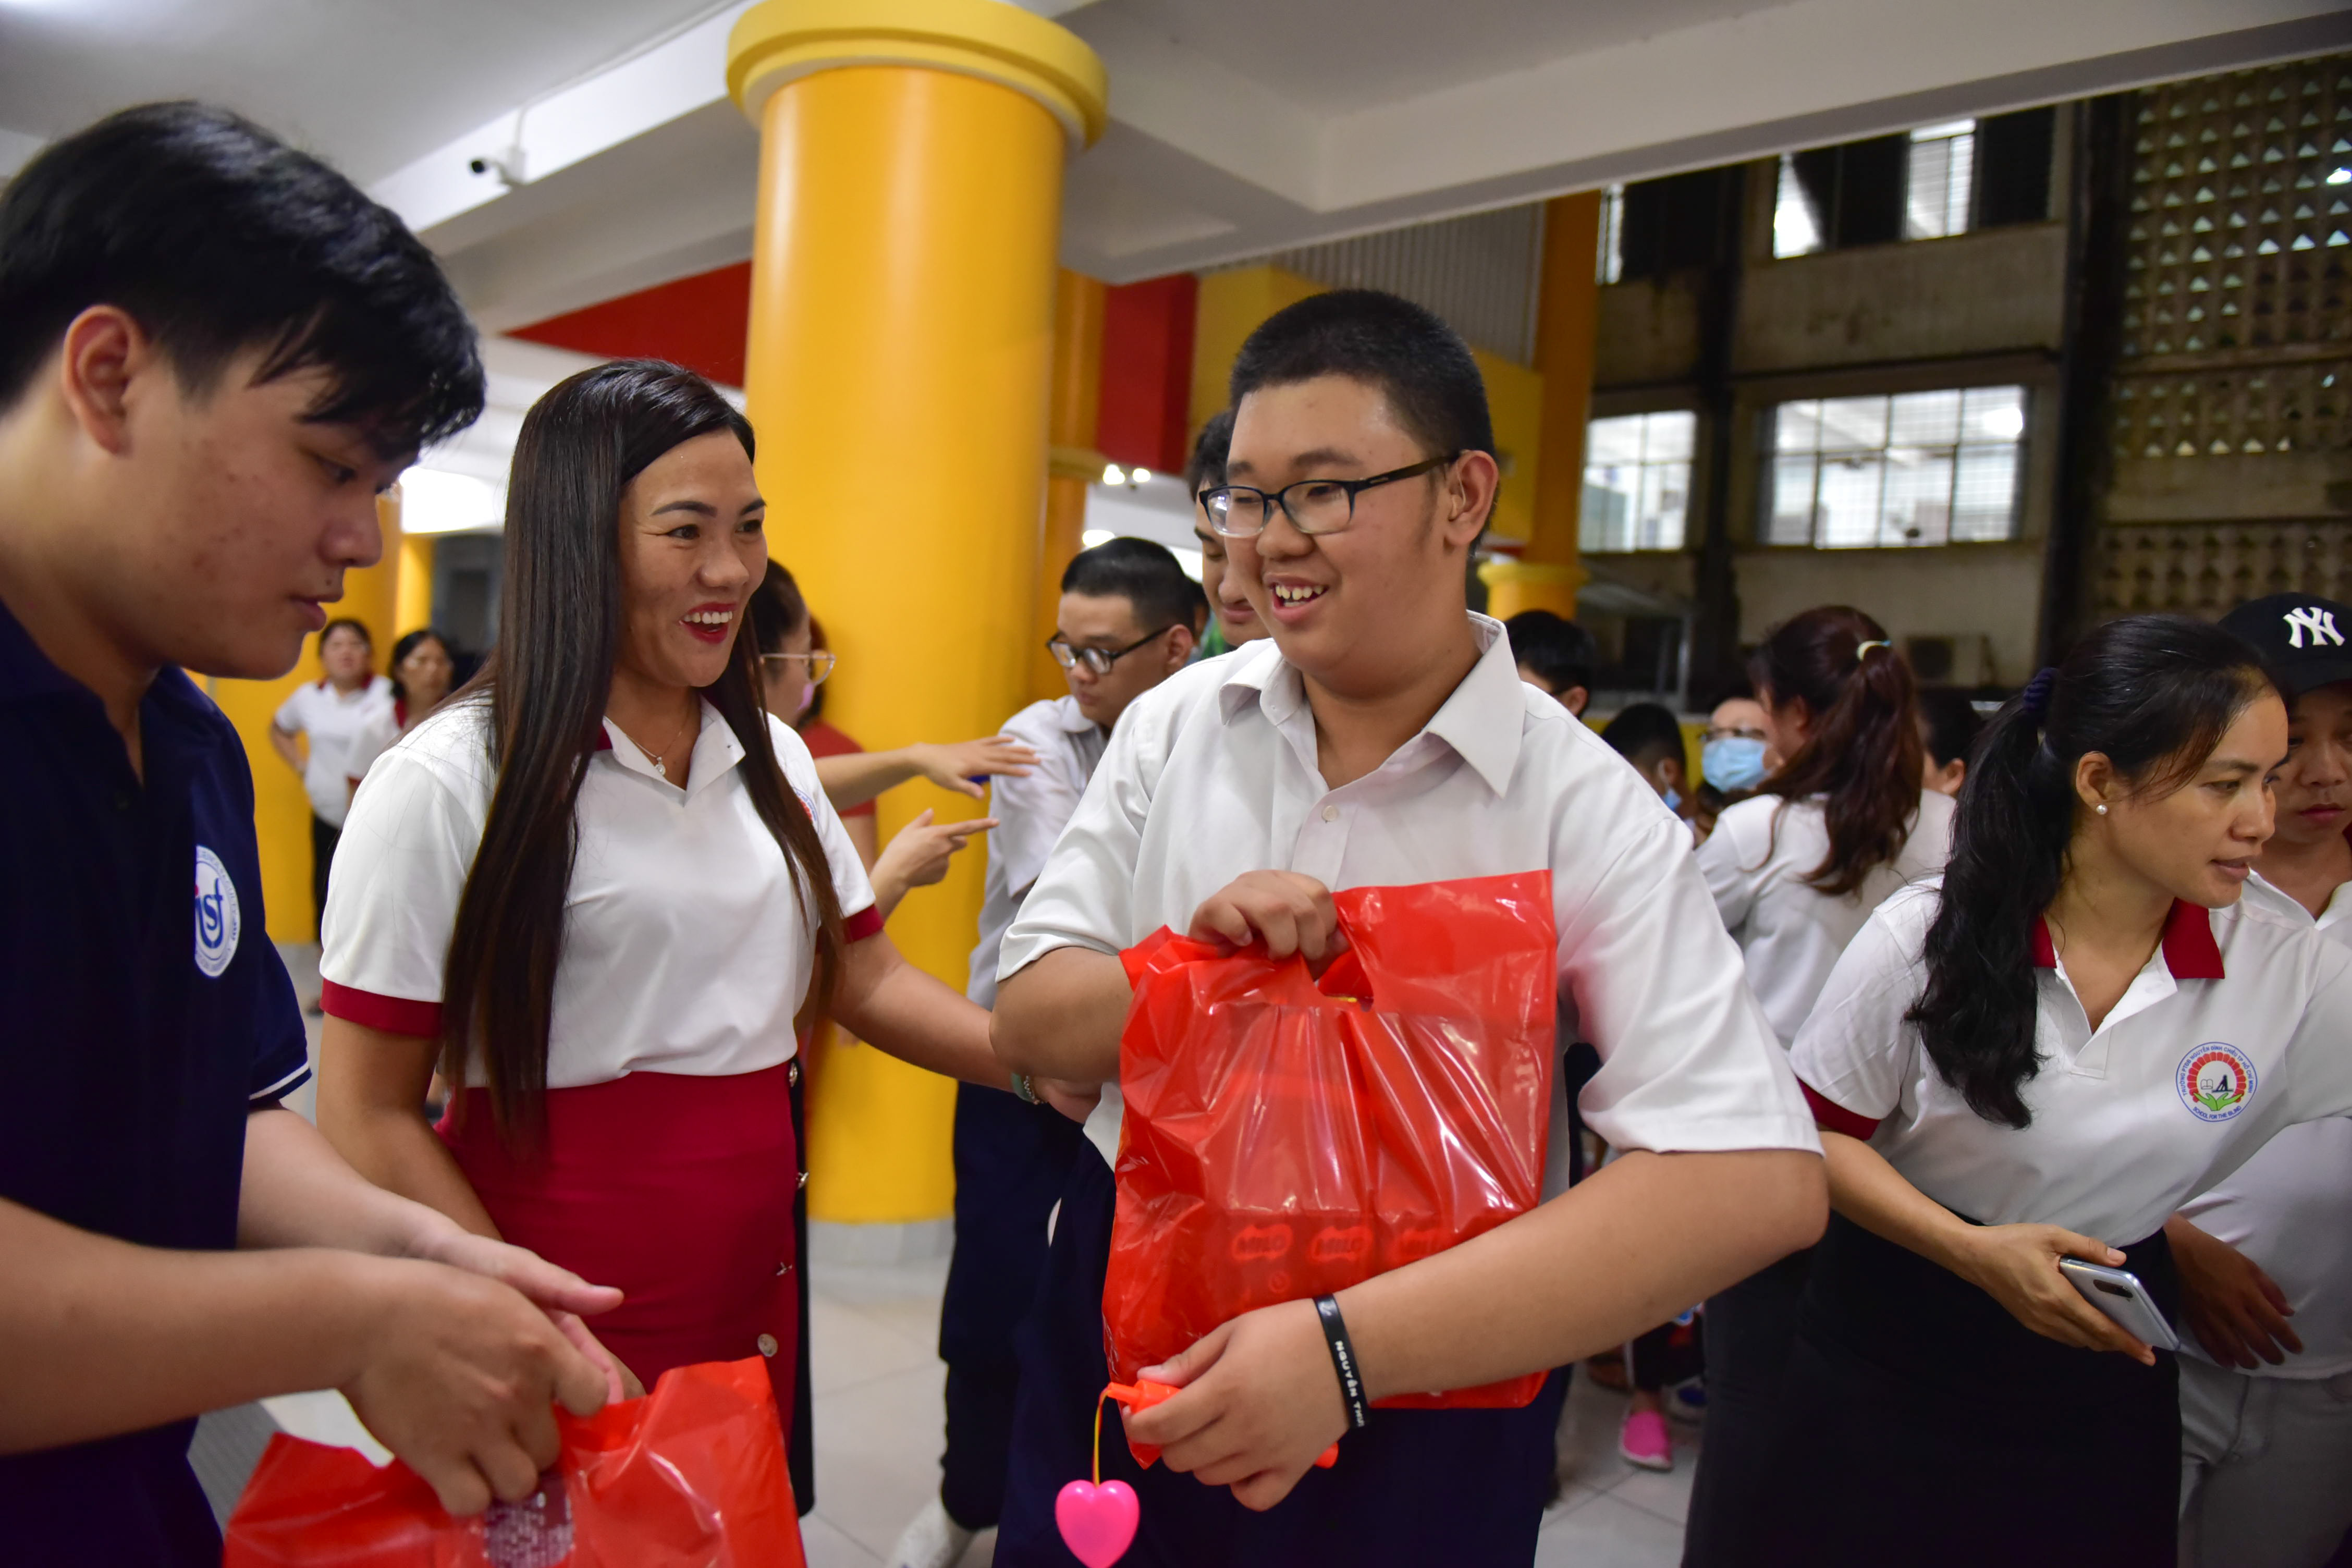 Students receive gitfs from donors after the parade. Photo: Ngoc Phuong / Tuoi Tre News